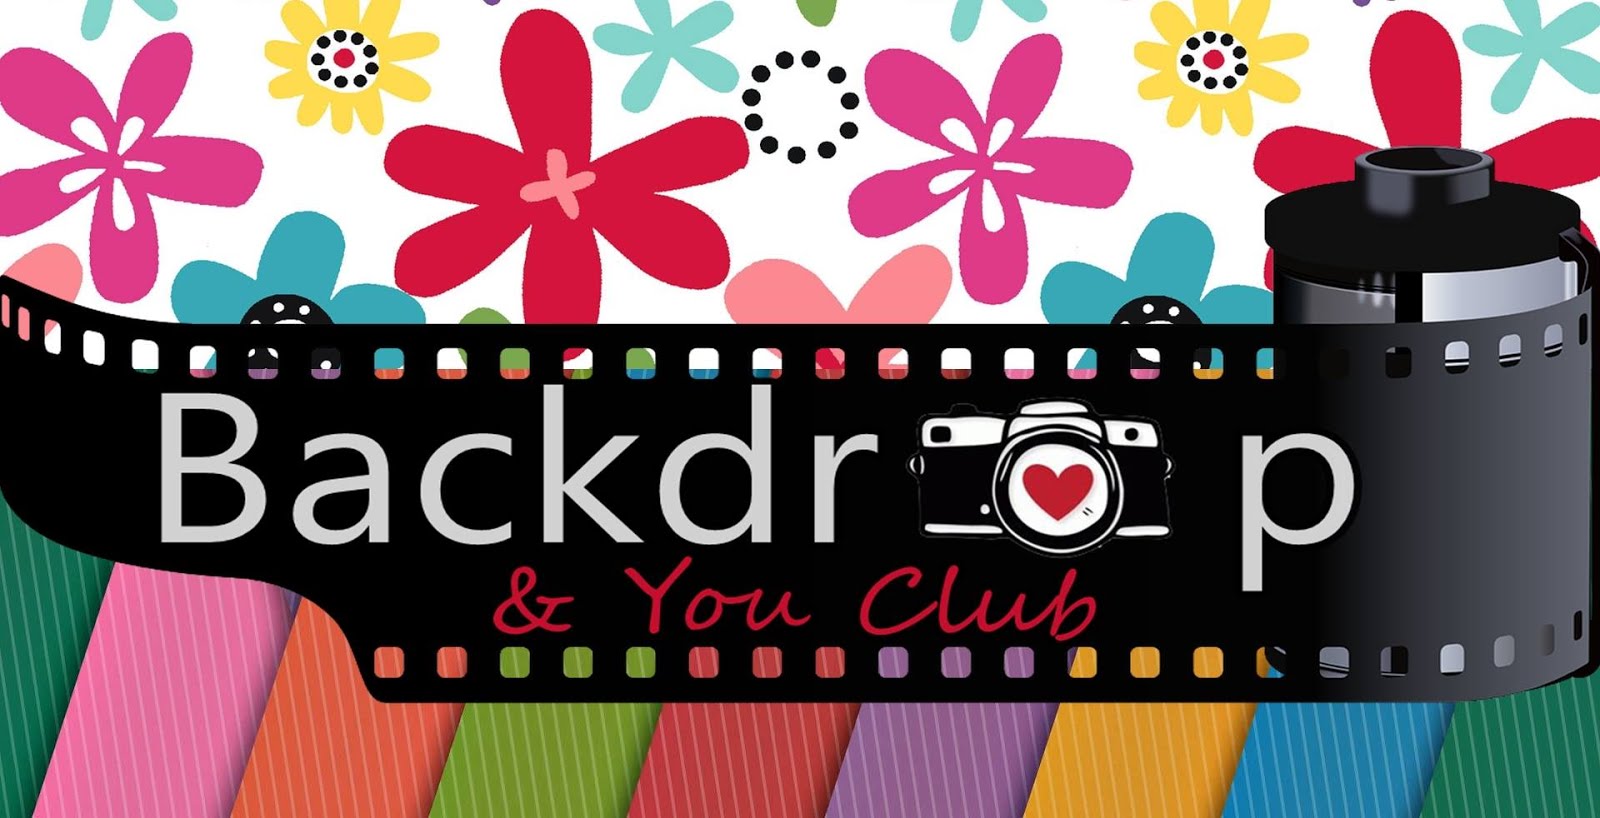 Backdrop & You Club - Location of Backdrops and Backgrounds